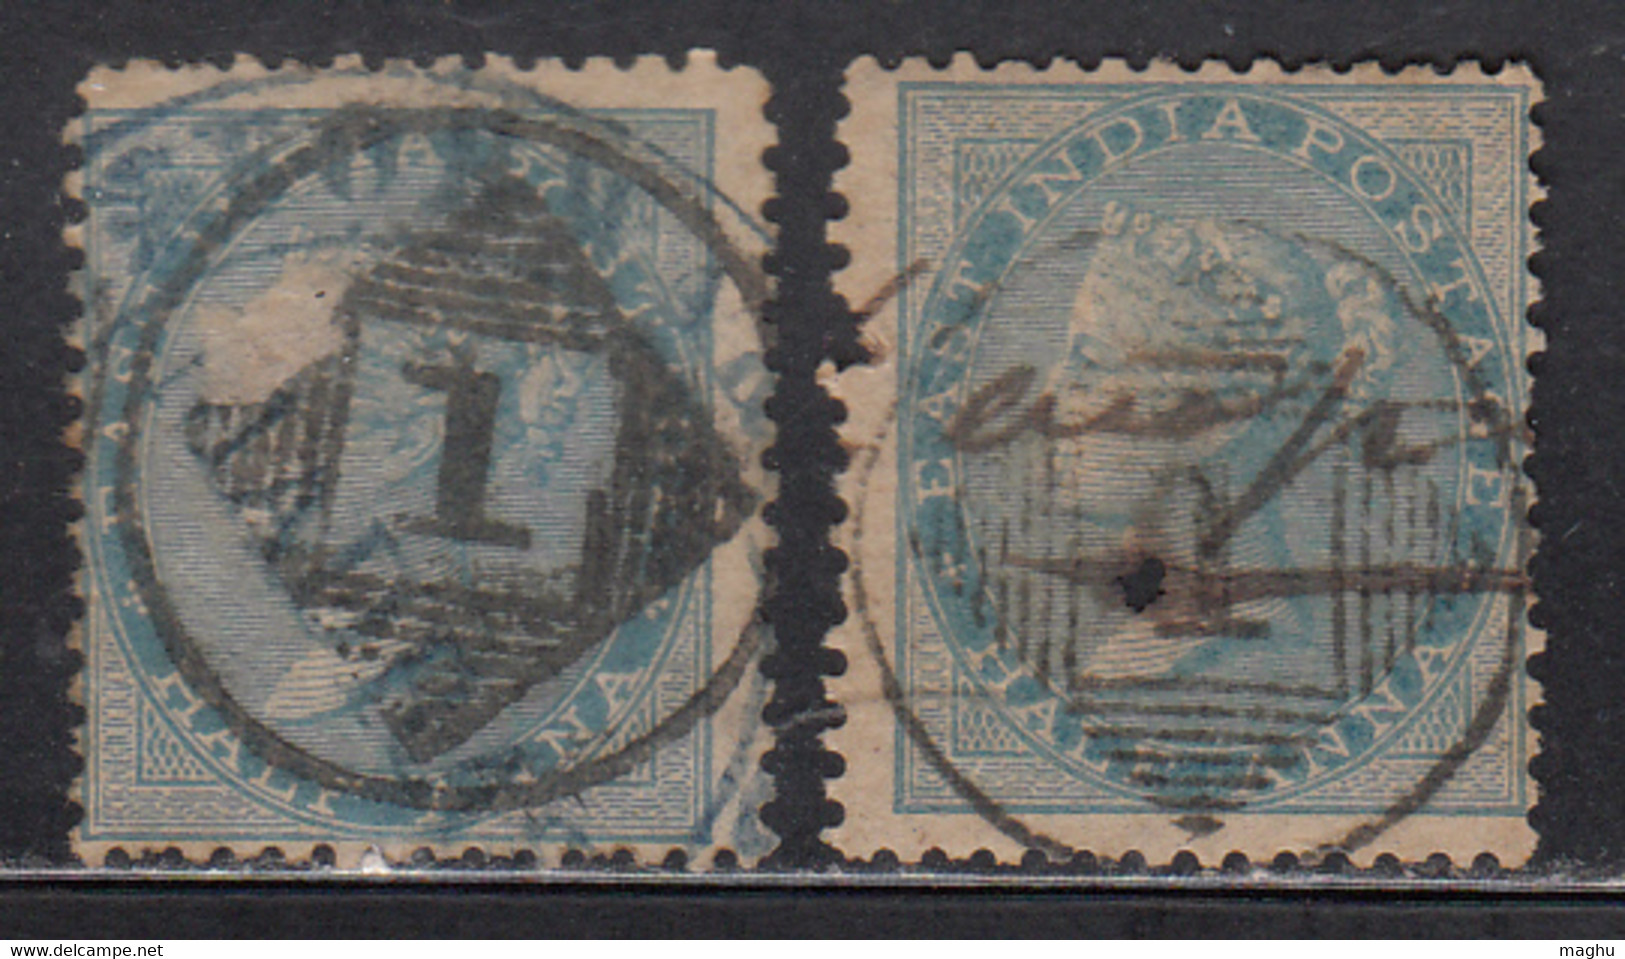 '1' Madras X 2 Diff. Varity Madras Circle/ Cooper / Renouf Type 9, British East India Used, Early Indian Cancellations - 1854 East India Company Administration